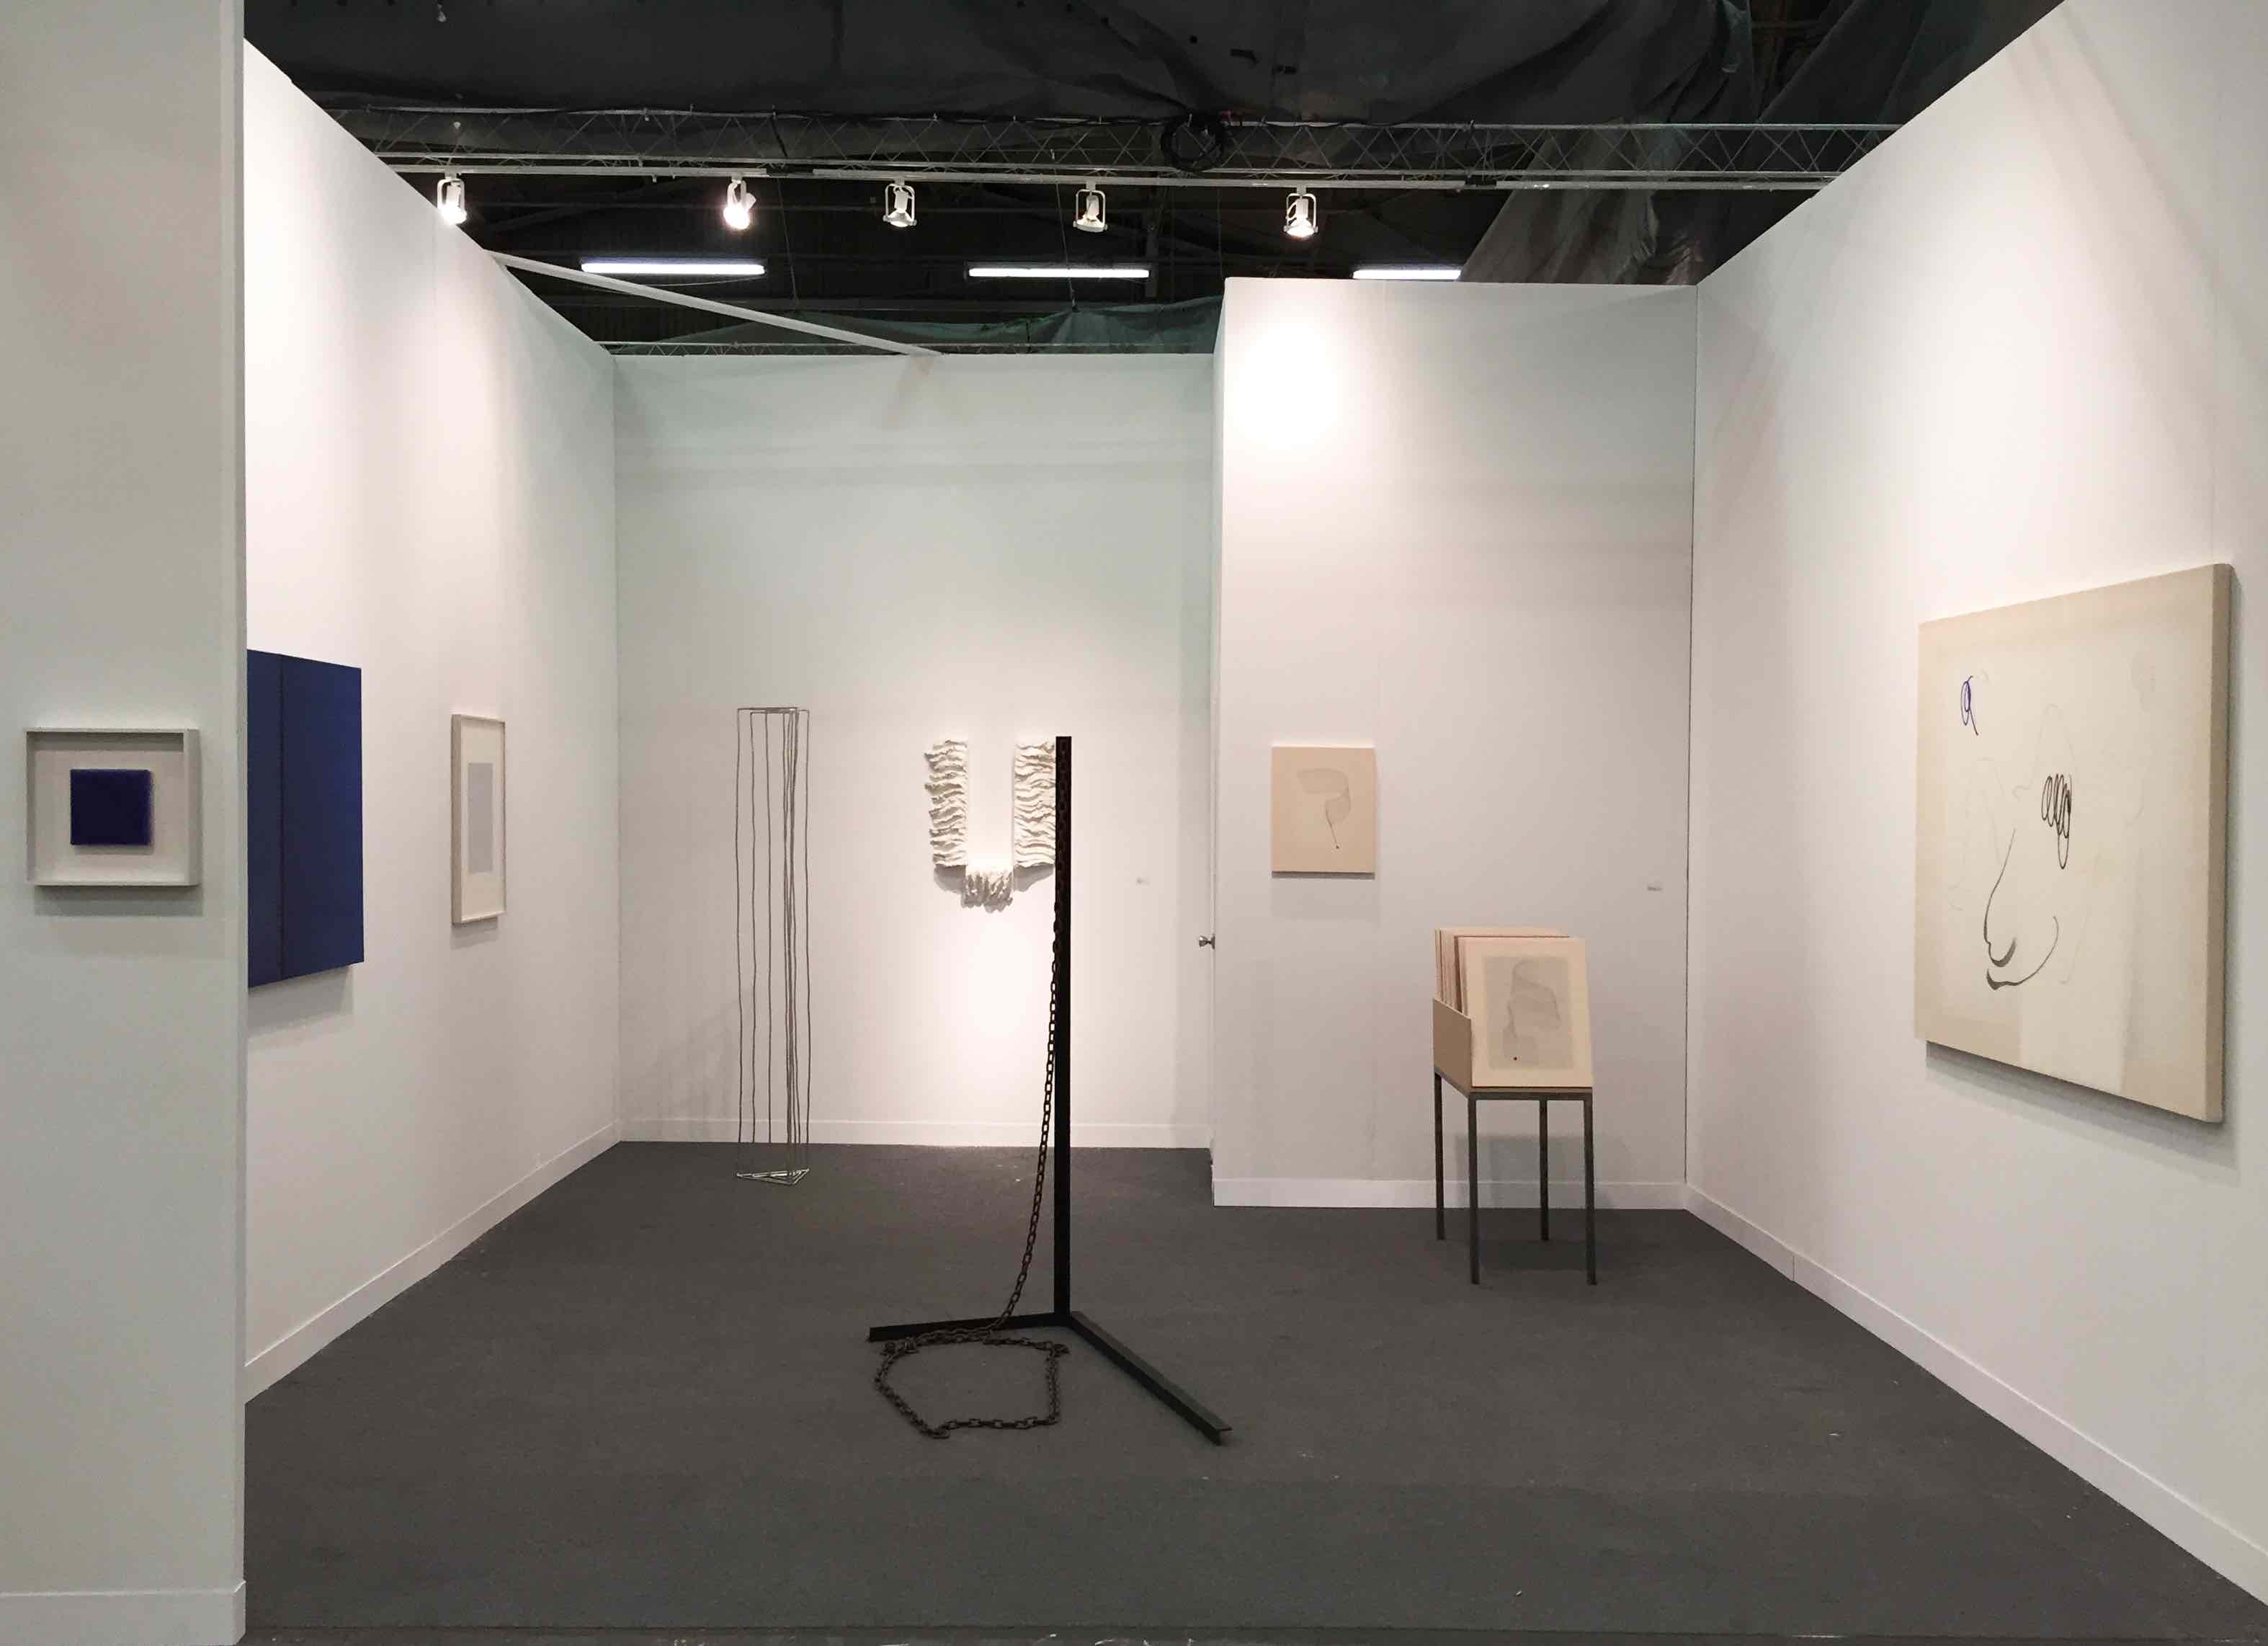 P420 at The Armory Show - 